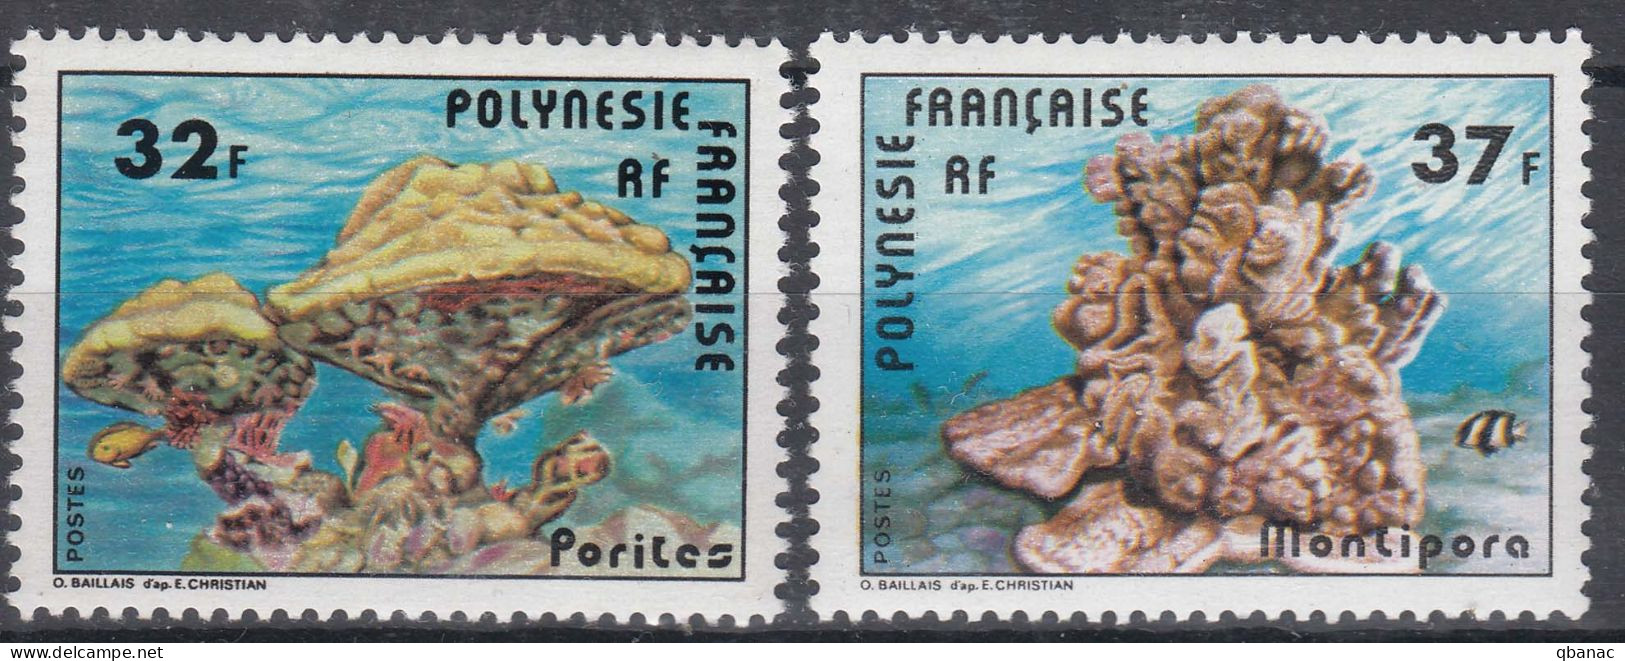 French Polynesia Polinesie 1979 Mi#276-277 Mint Never Hinged - Unused Stamps